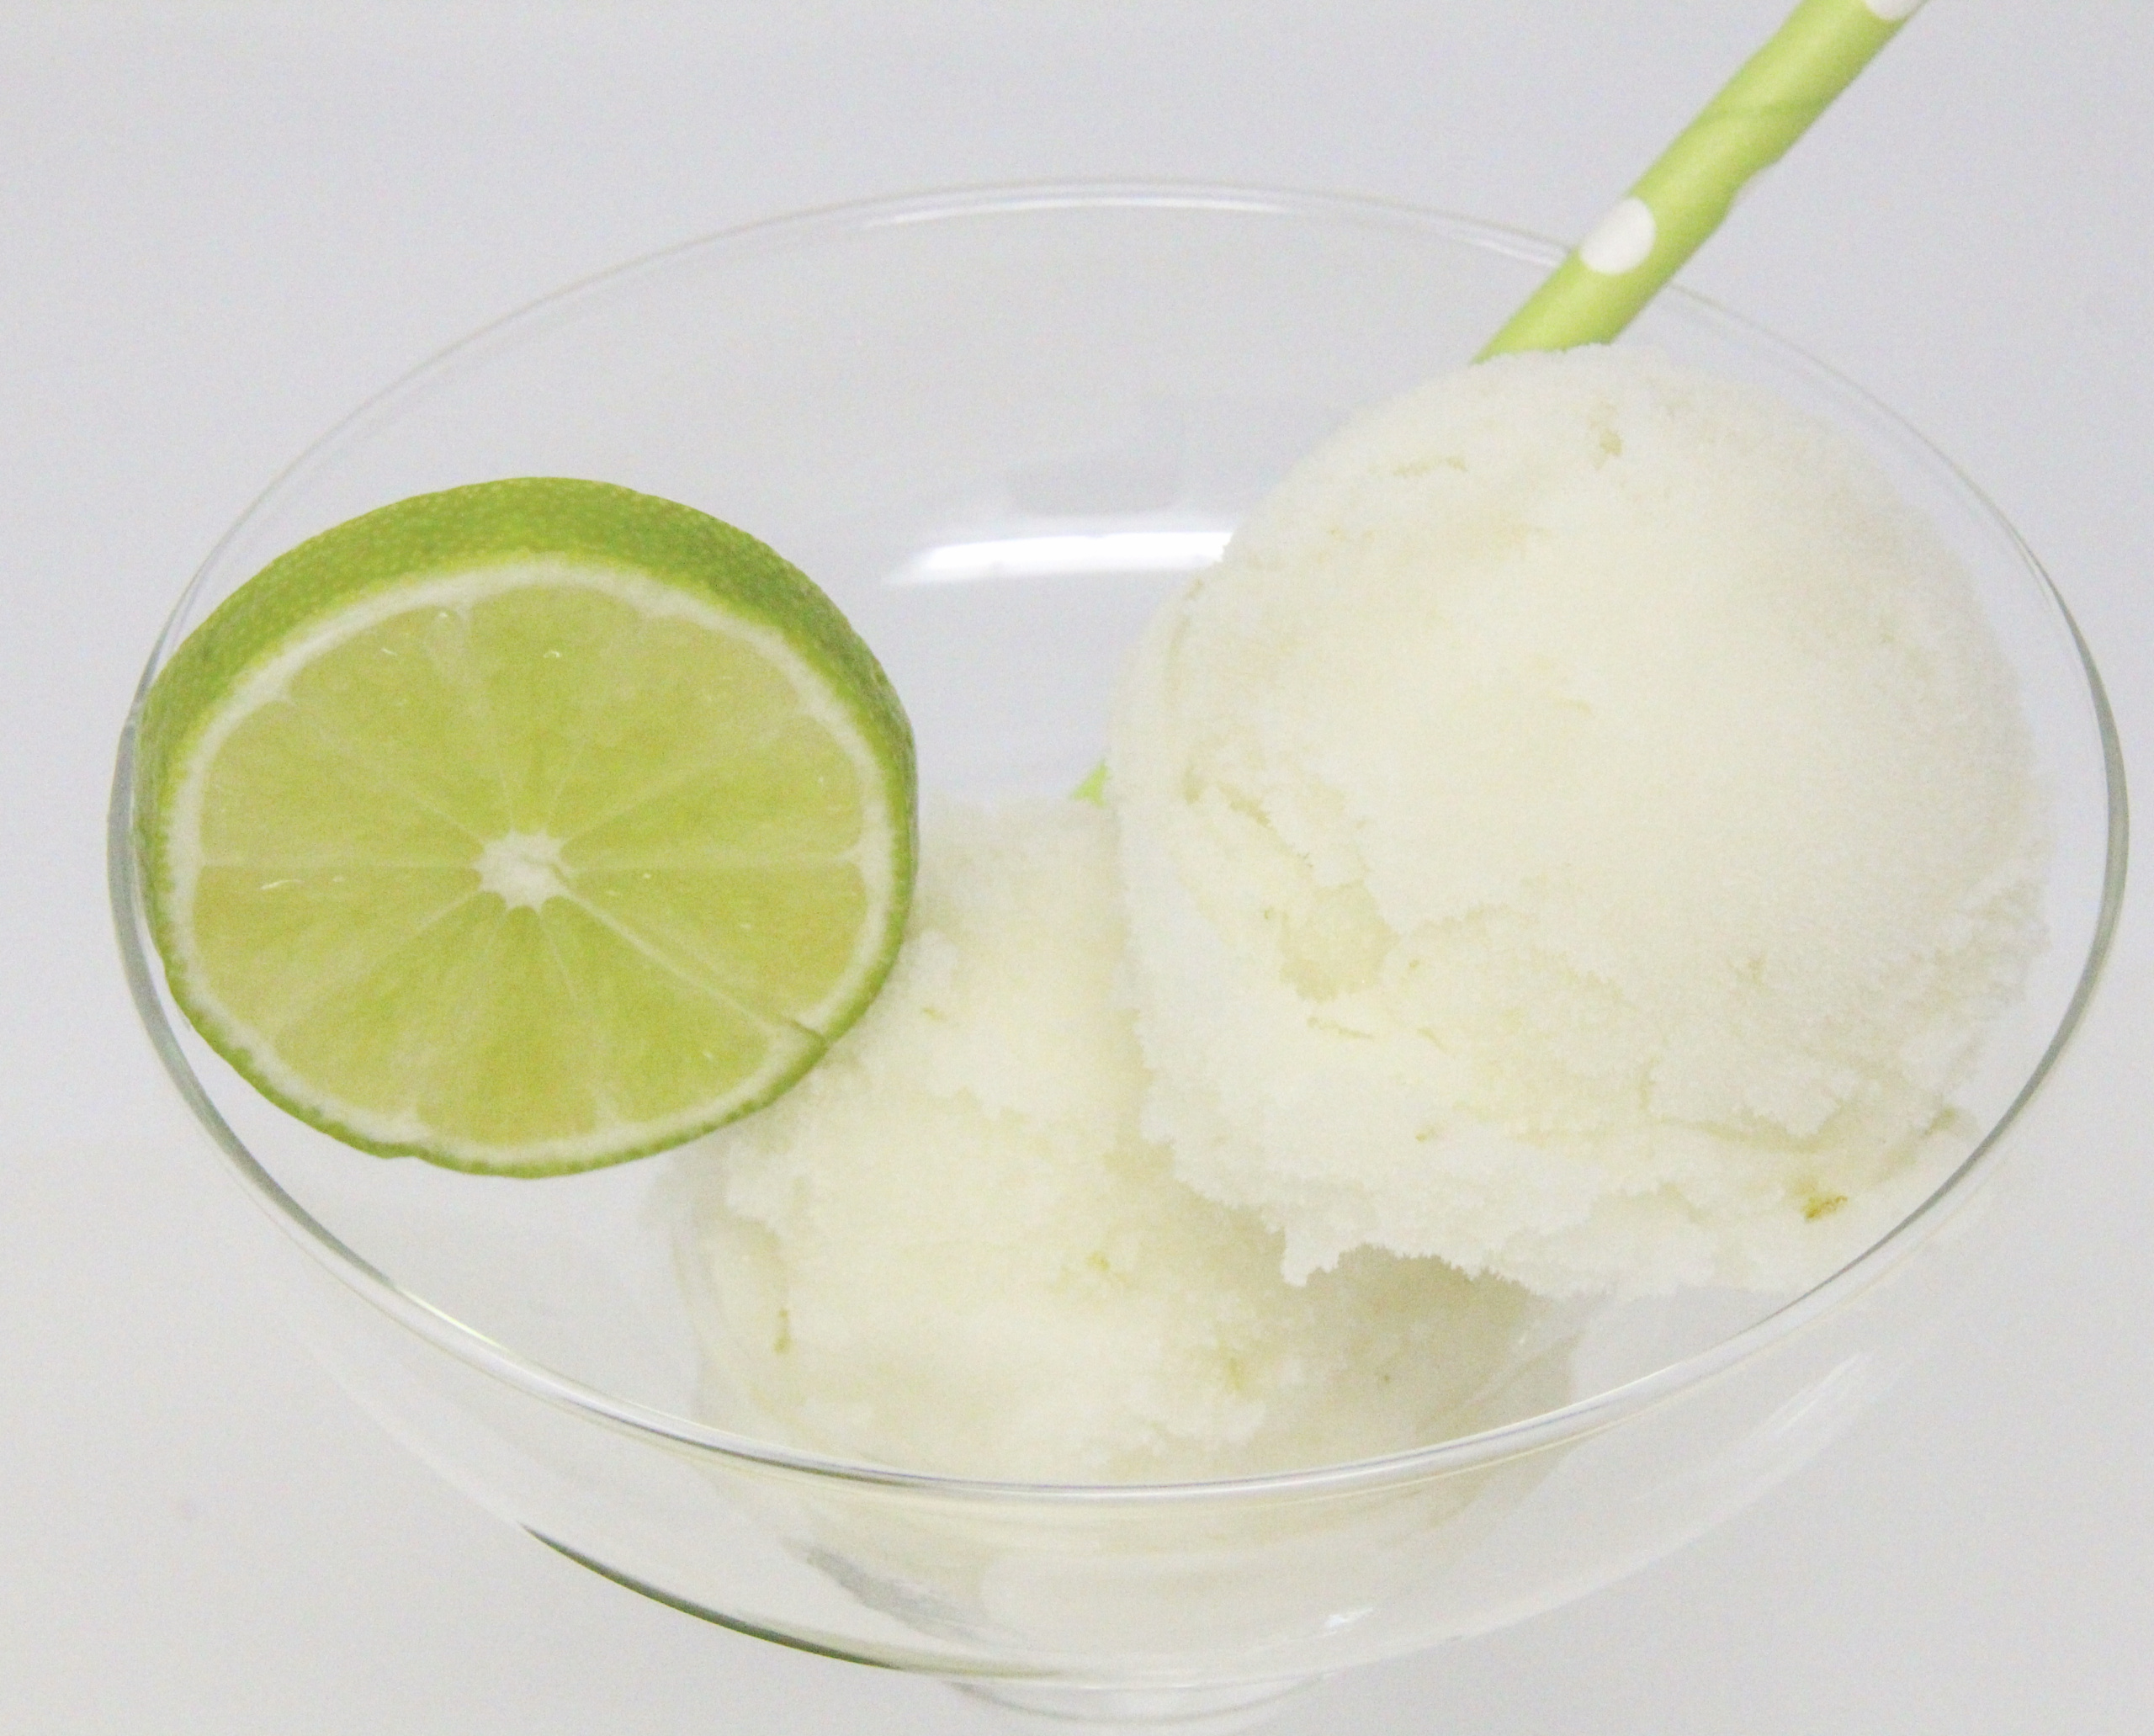 A tart-sweet lime sorbet with a kick from tequila and triple sec, this Ultimate Frozen Margarita captures the essence of summer! Recipe shared with permission granted by Meri Allan, author of THE ROCKY ROAD TO RUIN. 